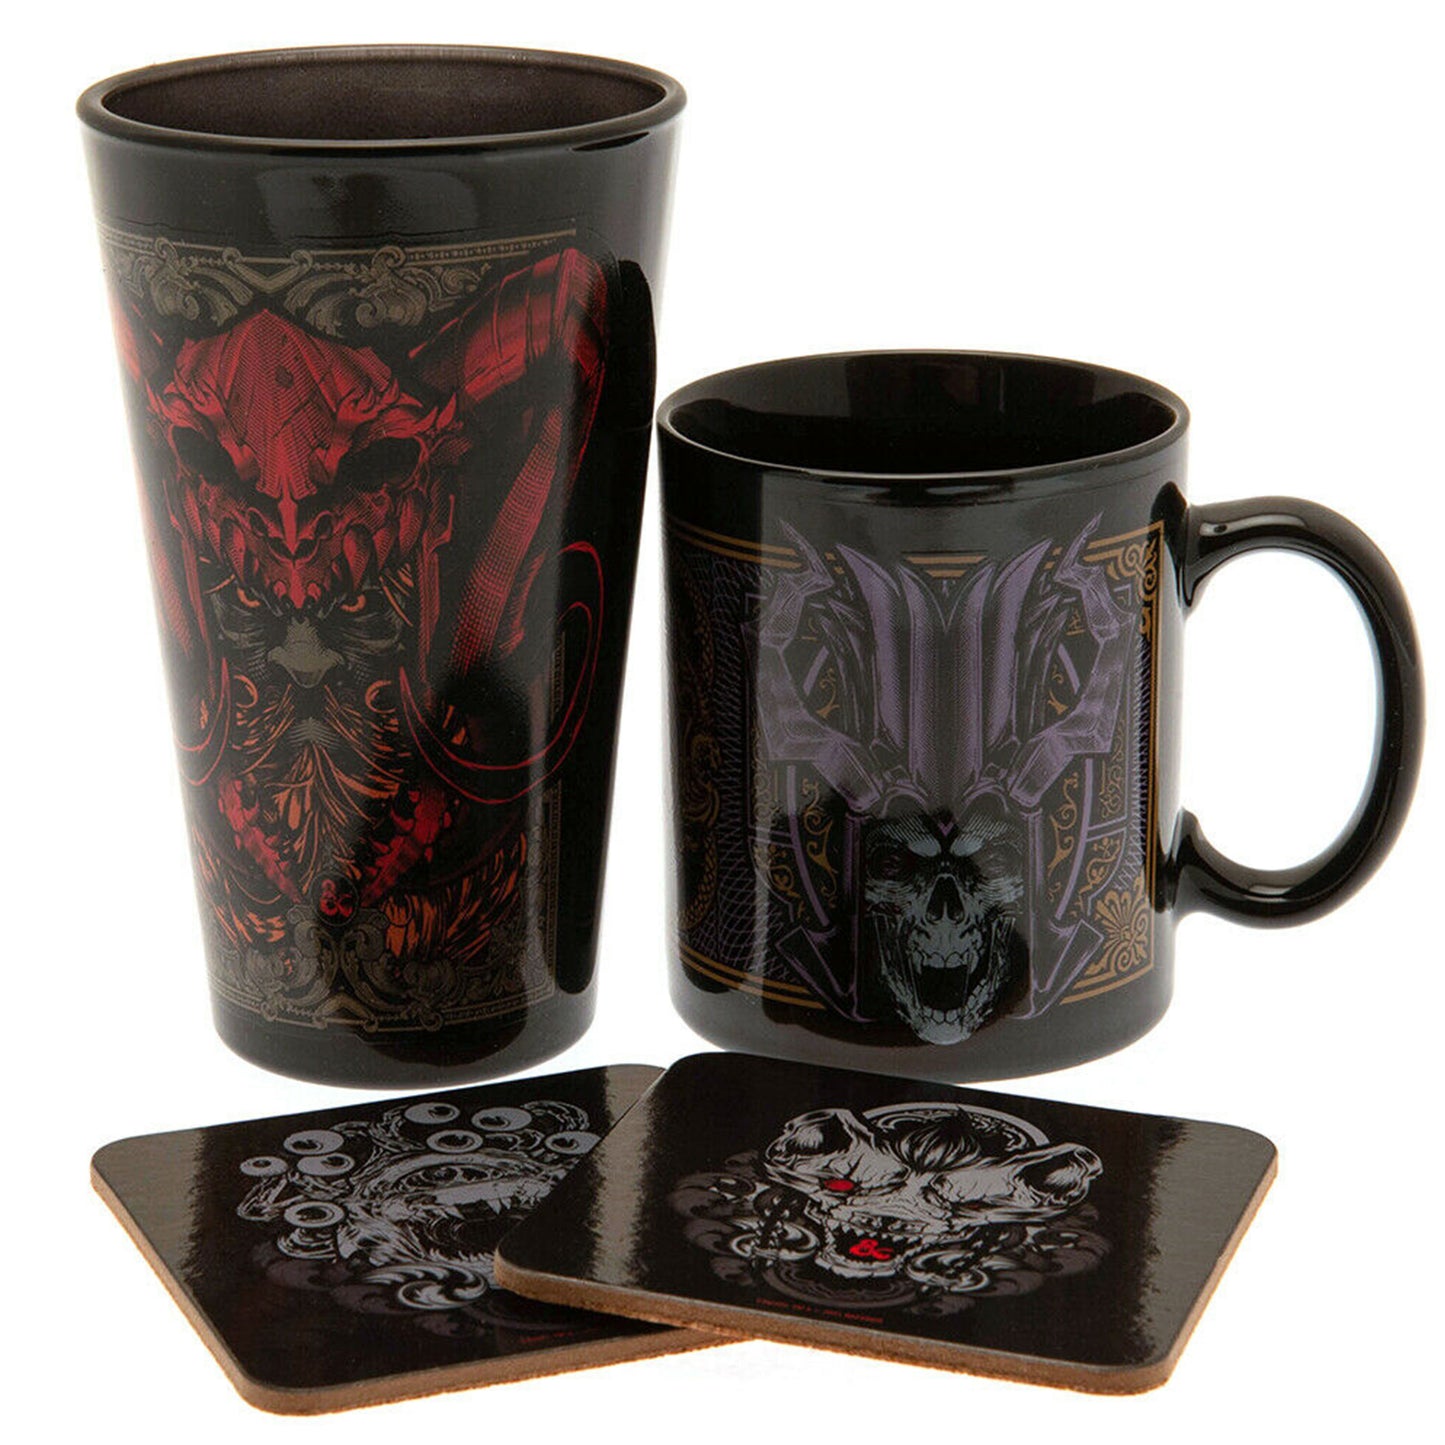 Dungeons and Dragons (DnD) Mug, Glass & Coasters Gift Set Contents | Happy Piranha